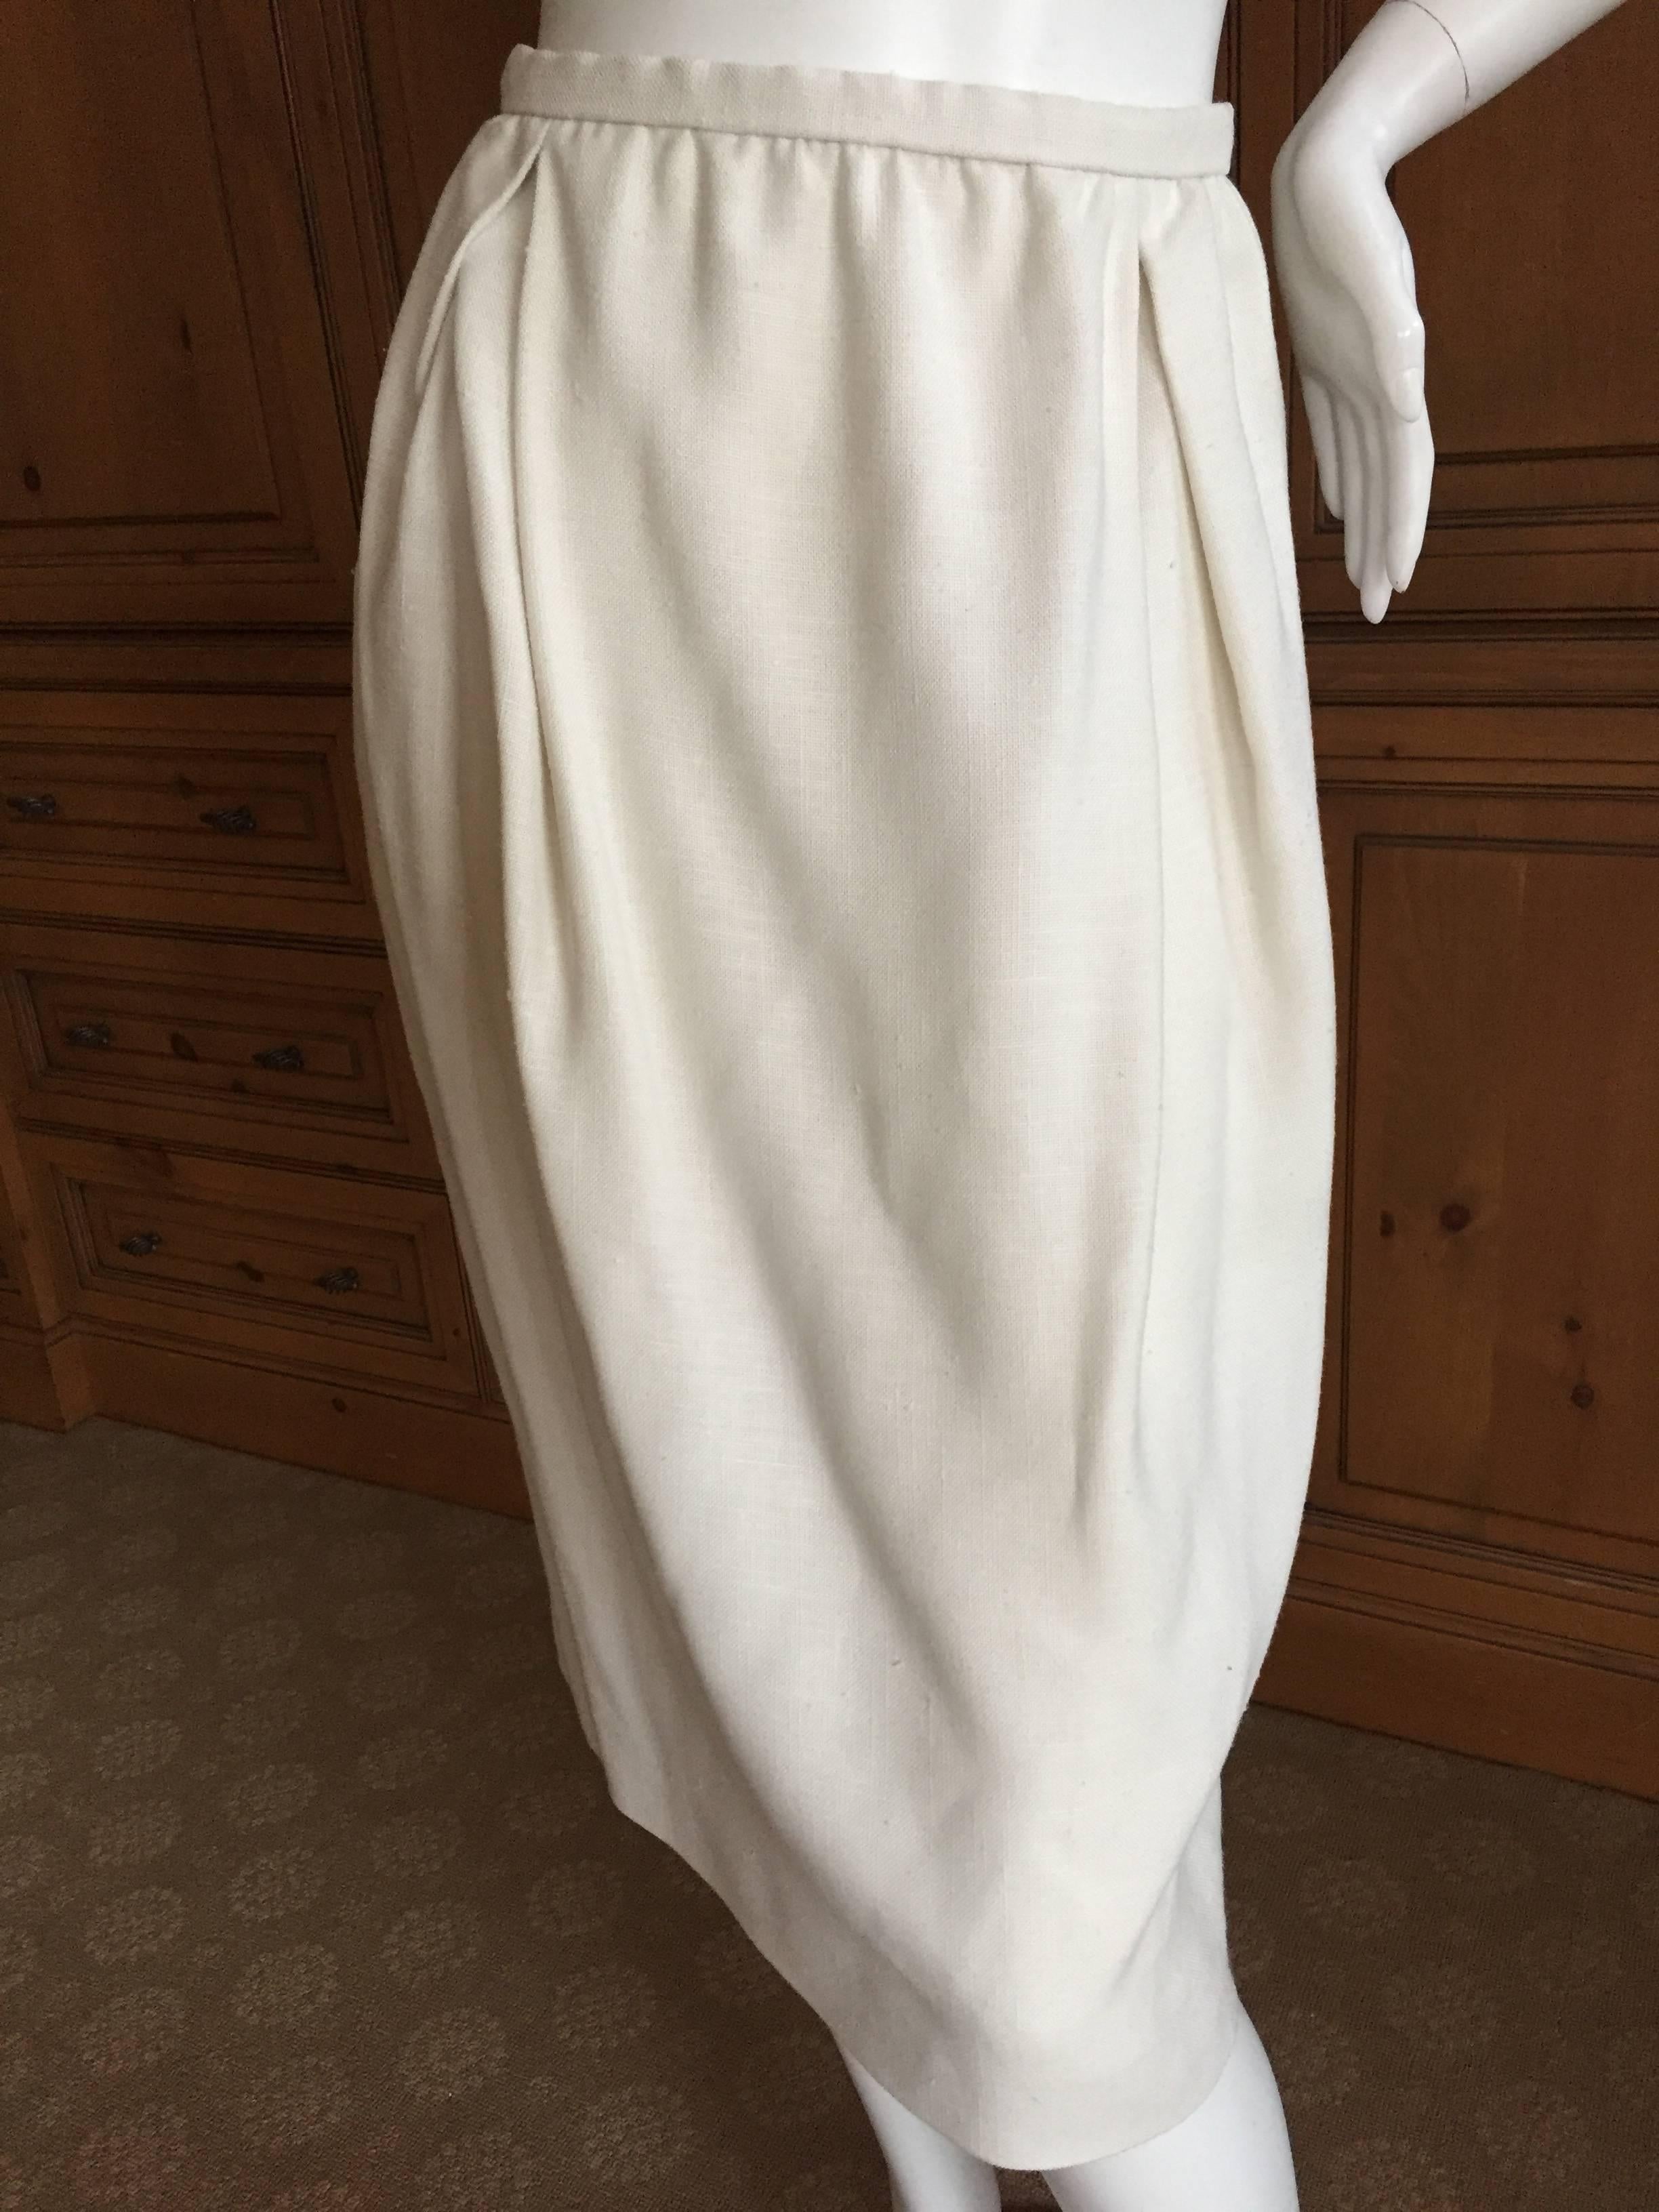 Halston 1970's Ivory Linen Skirt Suit from I.Magnin For Sale 2